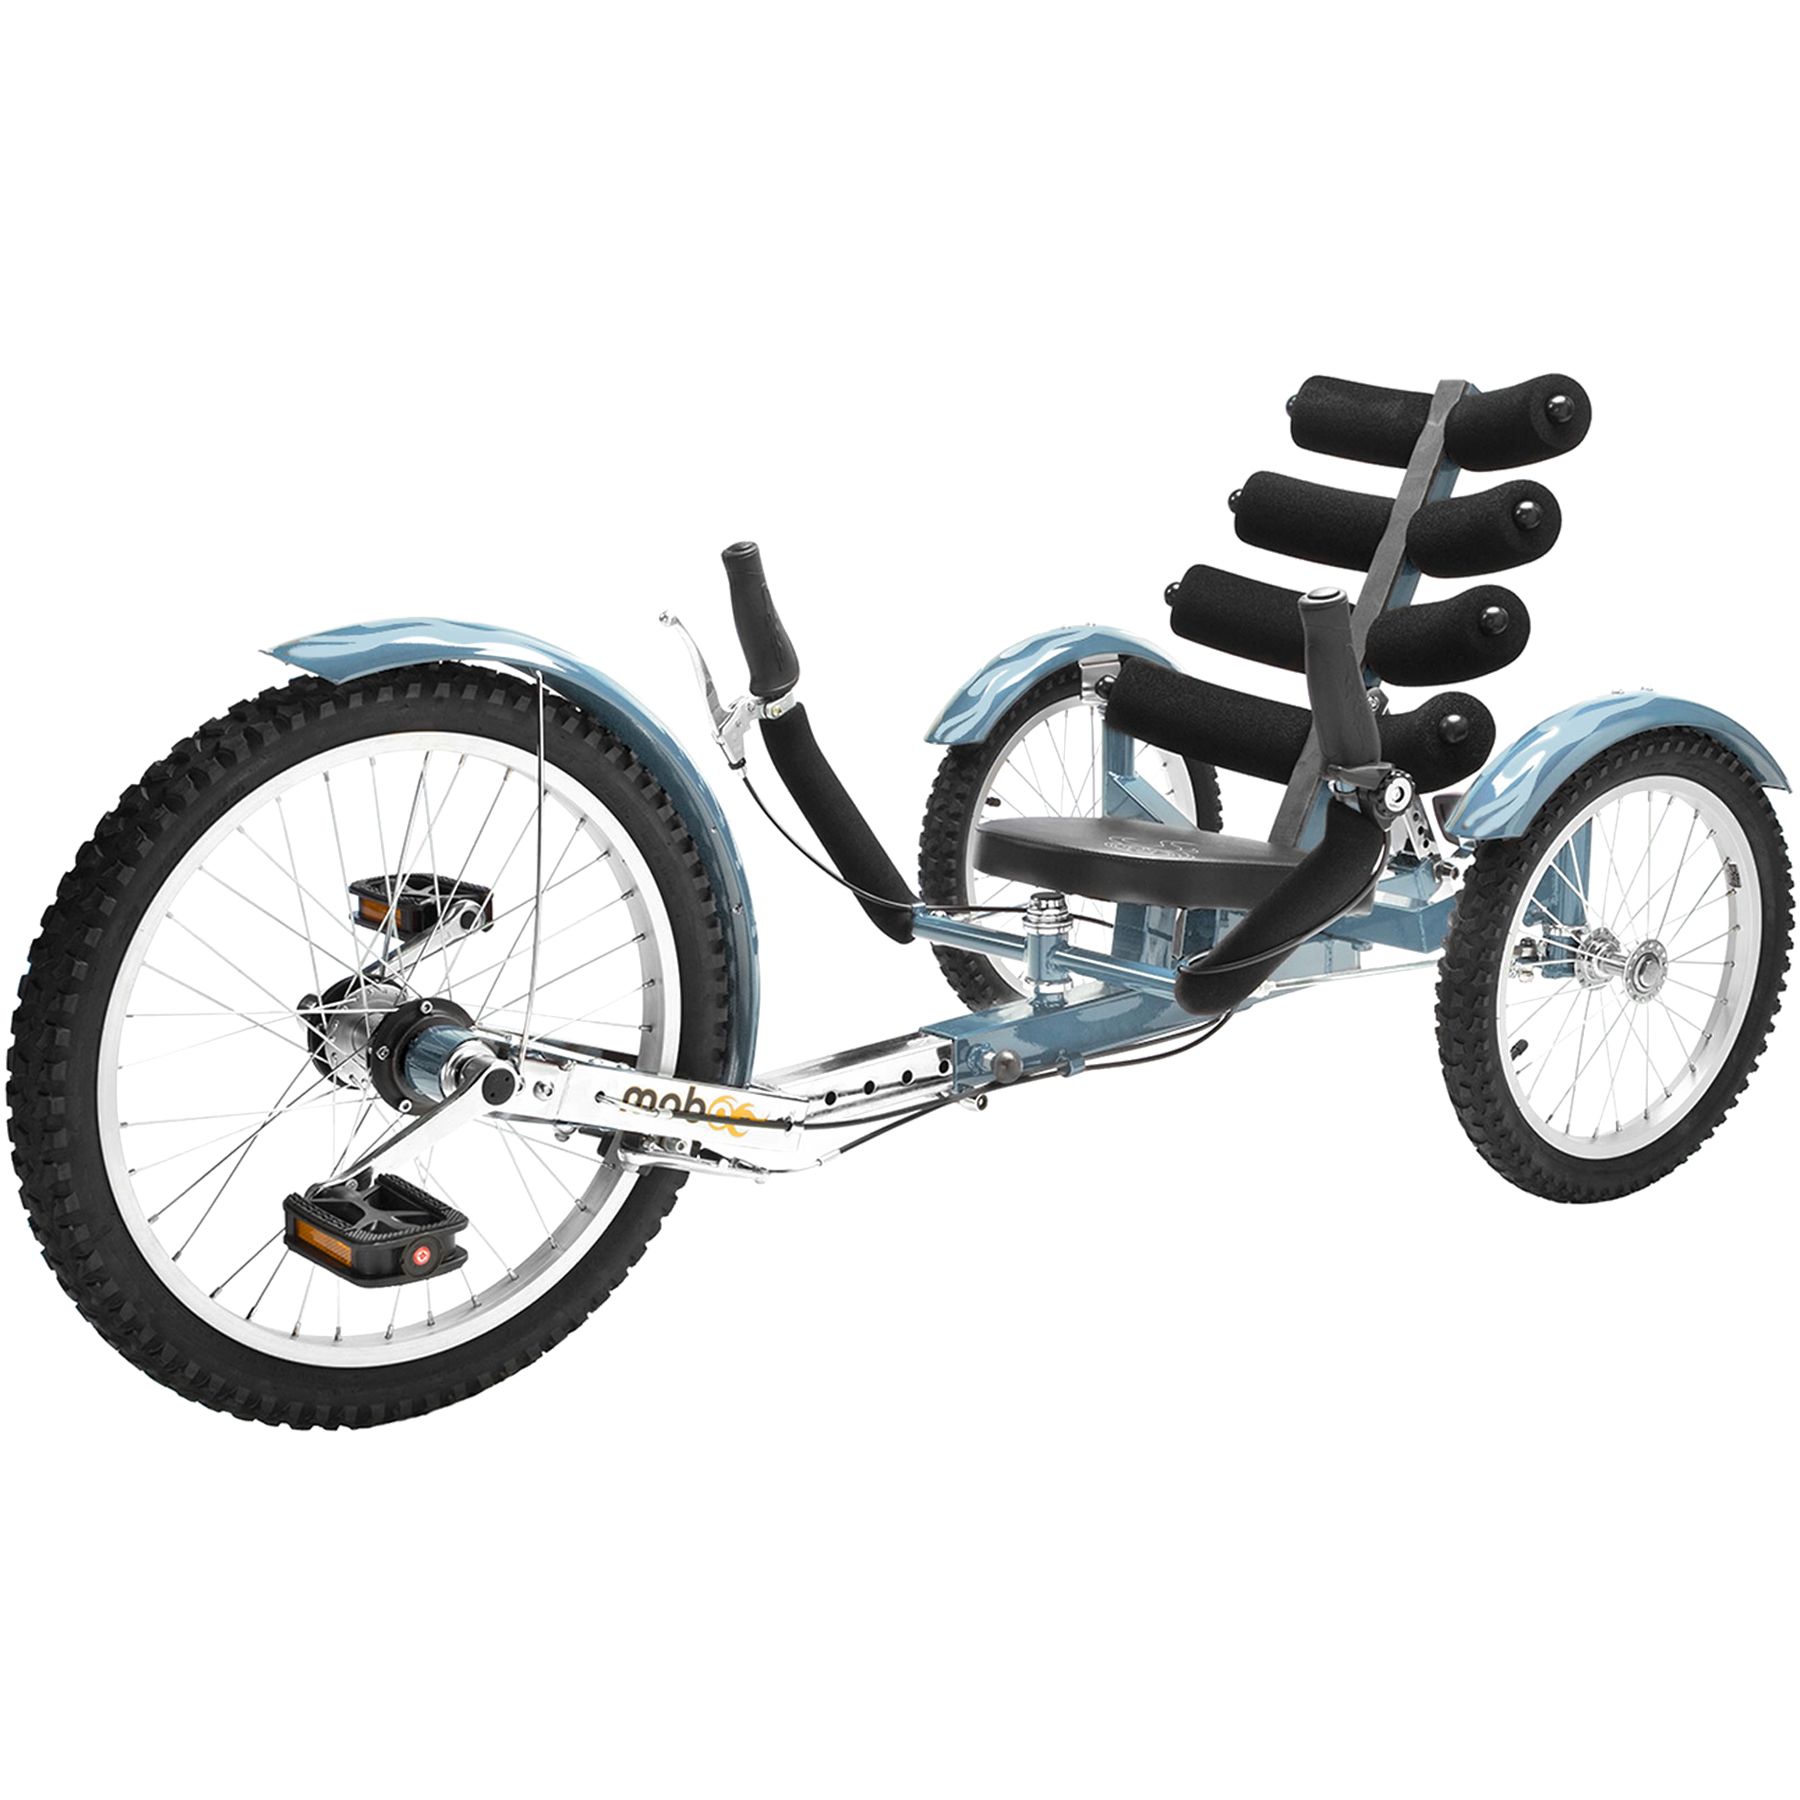 Picture of ASA Products Tri-301BL 20 in. Mobo Shift Three Wheel Cruiser - Blue